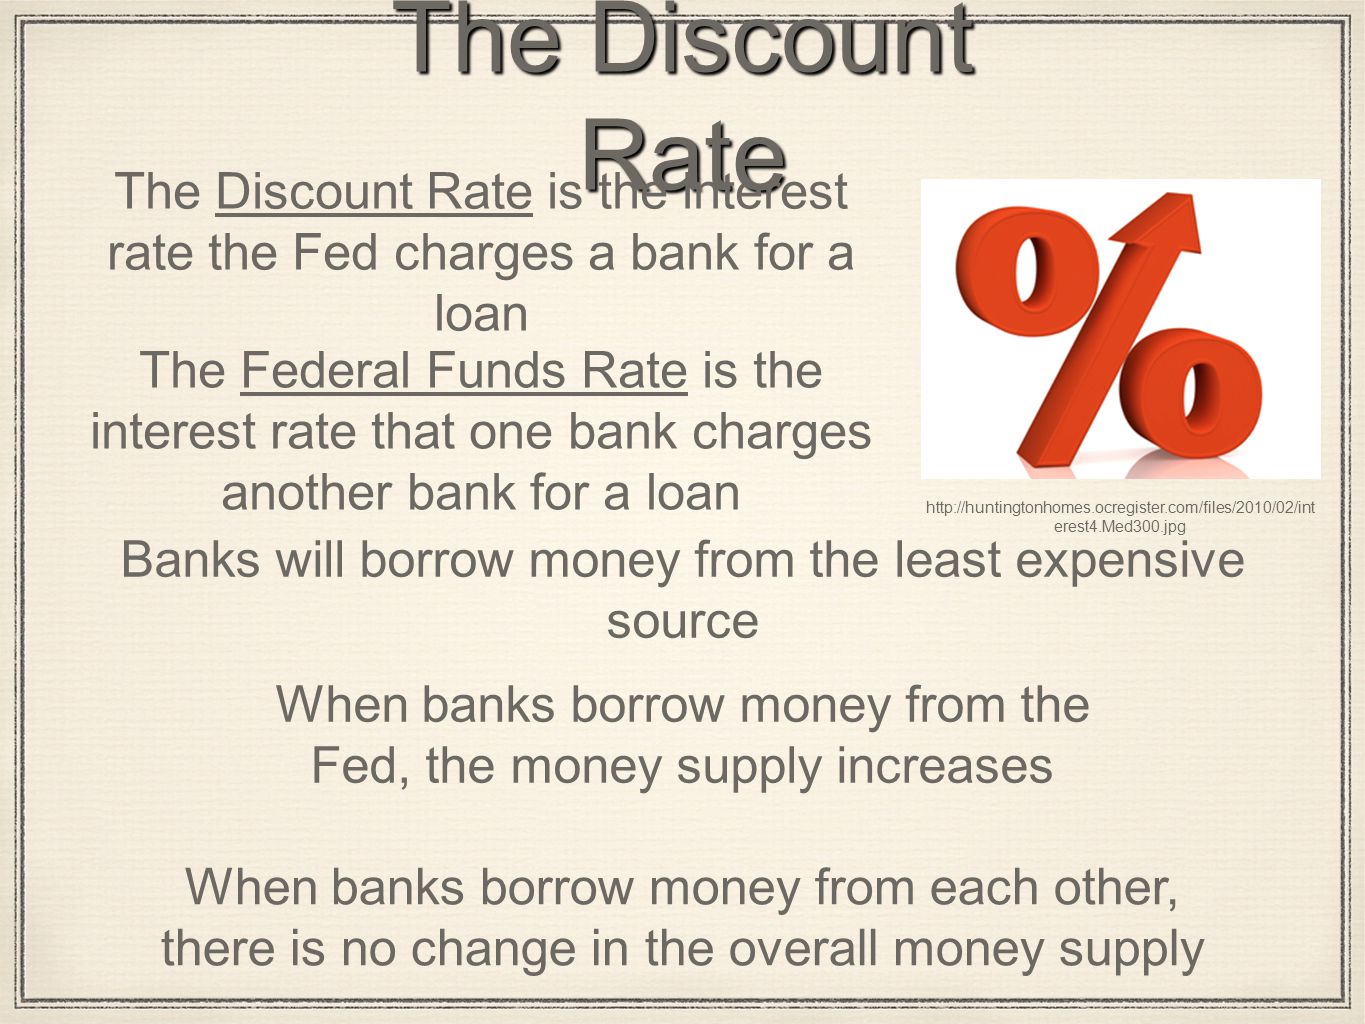 The Discount Rate The Discount Rate is the interest rate the Fed charges a bank for a loan The Federal Funds Rate is the interest rate that one bank charges another bank for a loan Banks will borrow money from the least expensive source   erest4.Med300.jpg When banks borrow money from the Fed, the money supply increases When banks borrow money from each other, there is no change in the overall money supply